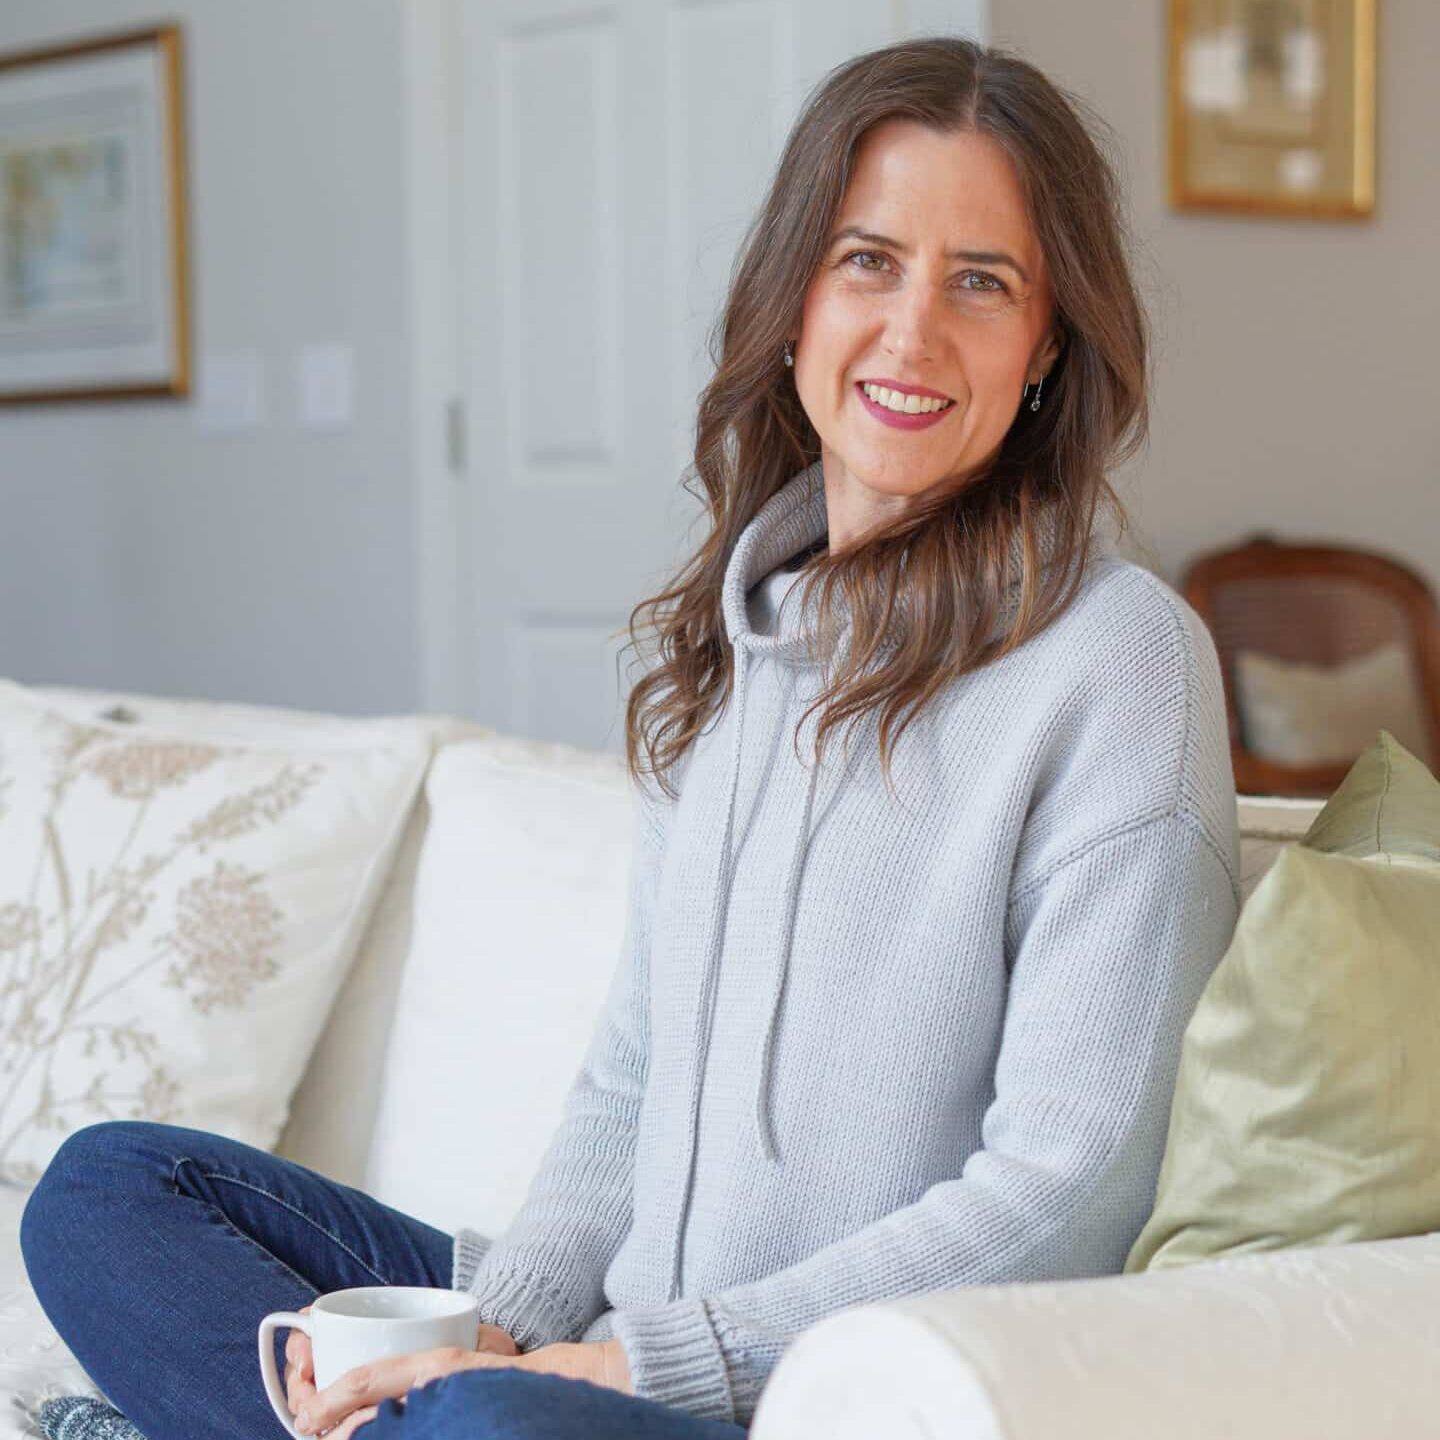 Health Coach Christie Kelemen and The Easy Anti-Inflammatory Lifestyle Blog for Highly Sensitive Women